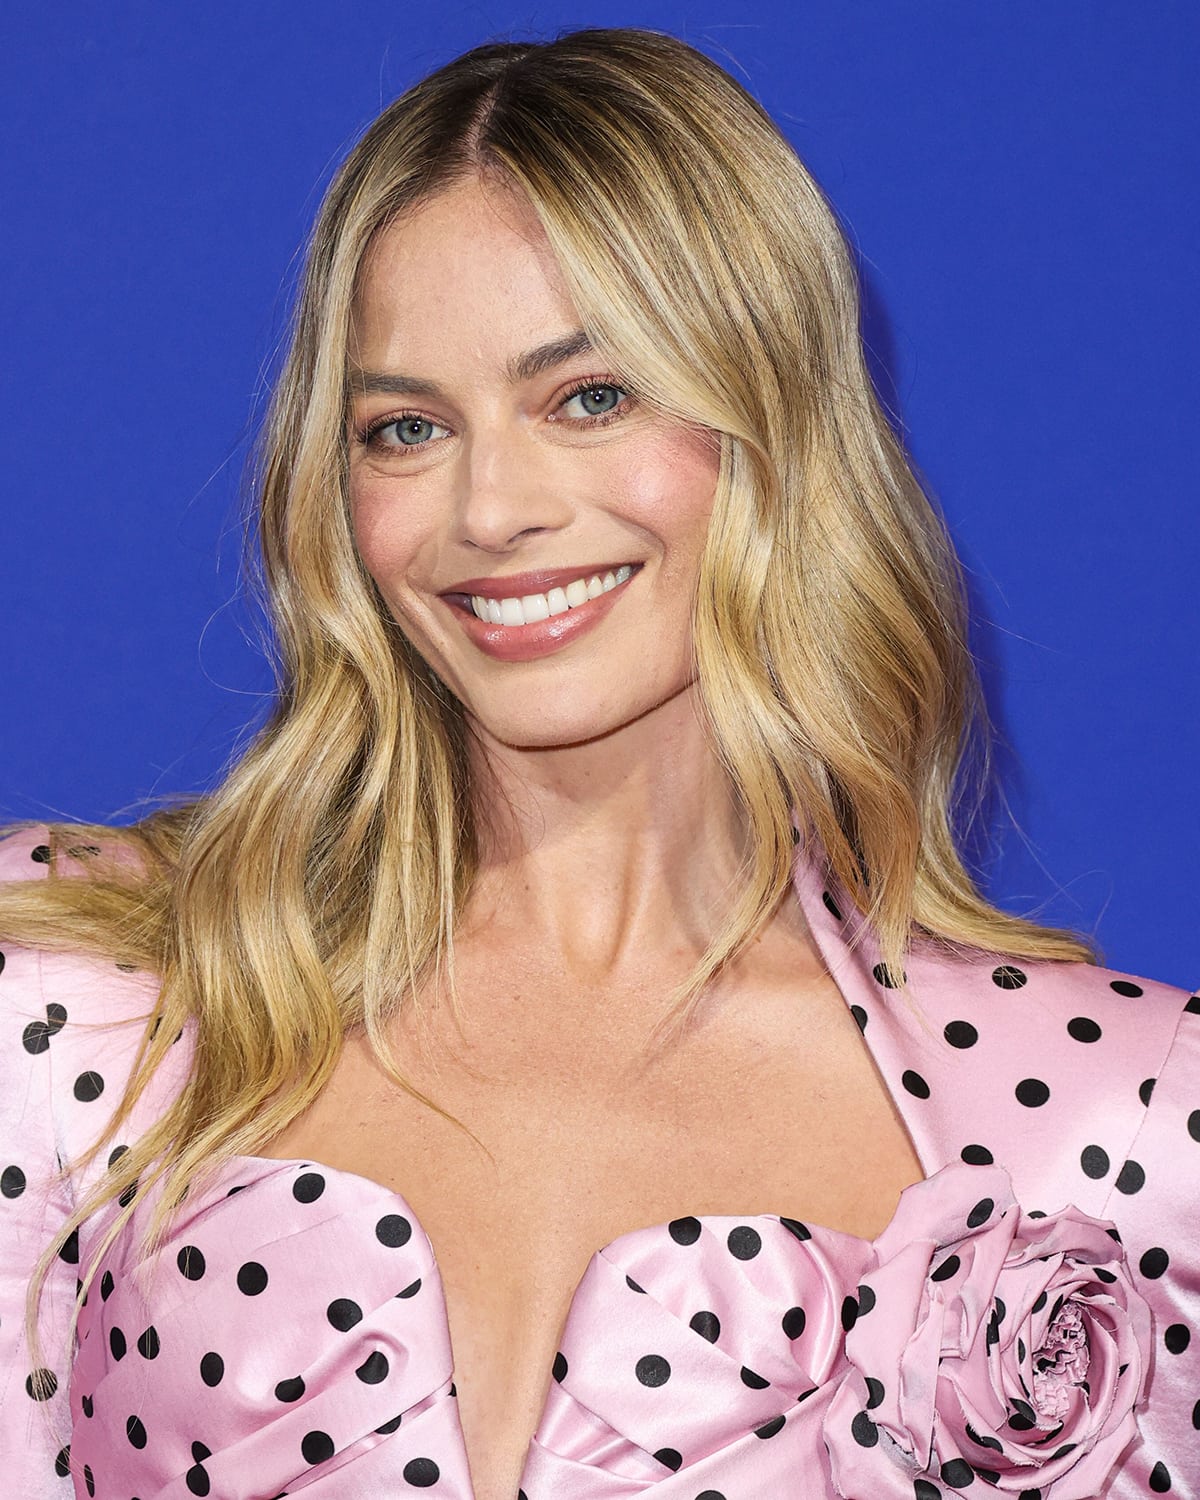 Margot Robbie styles her blonde hair in loose waves and wears Barbie-esque light pink makeup with mascara to highlight her blue eyes